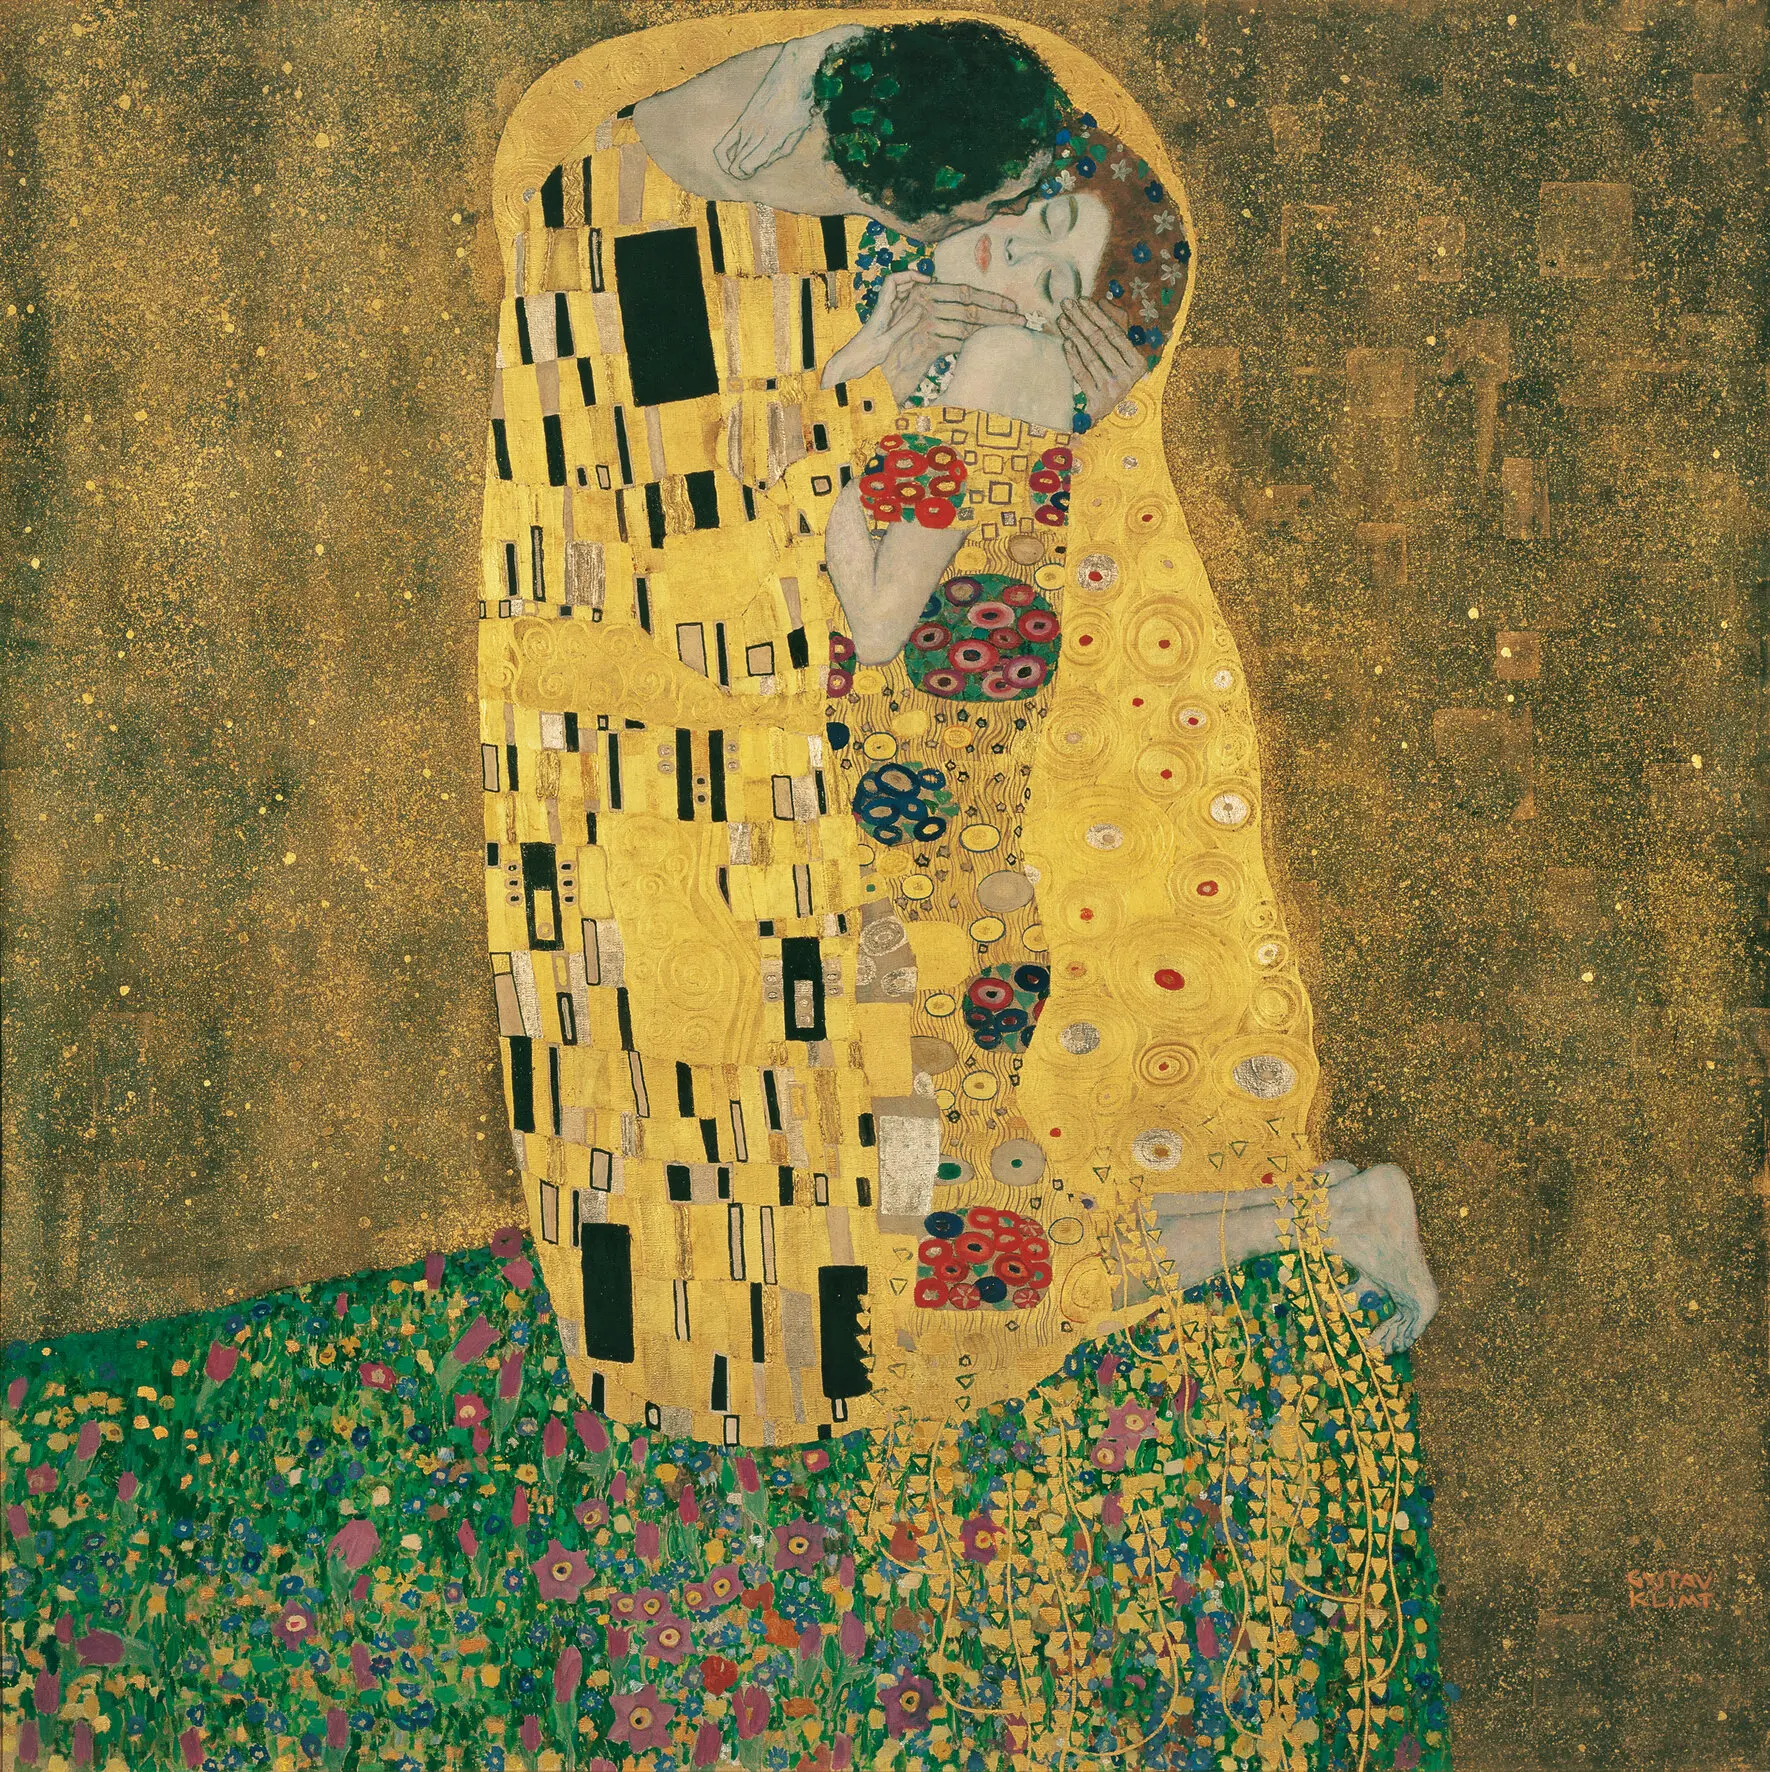 The-Belvedere-Museum-fractionalized-Gustav-Klimt's-"The-Kiss"-into-10000-NFTs.